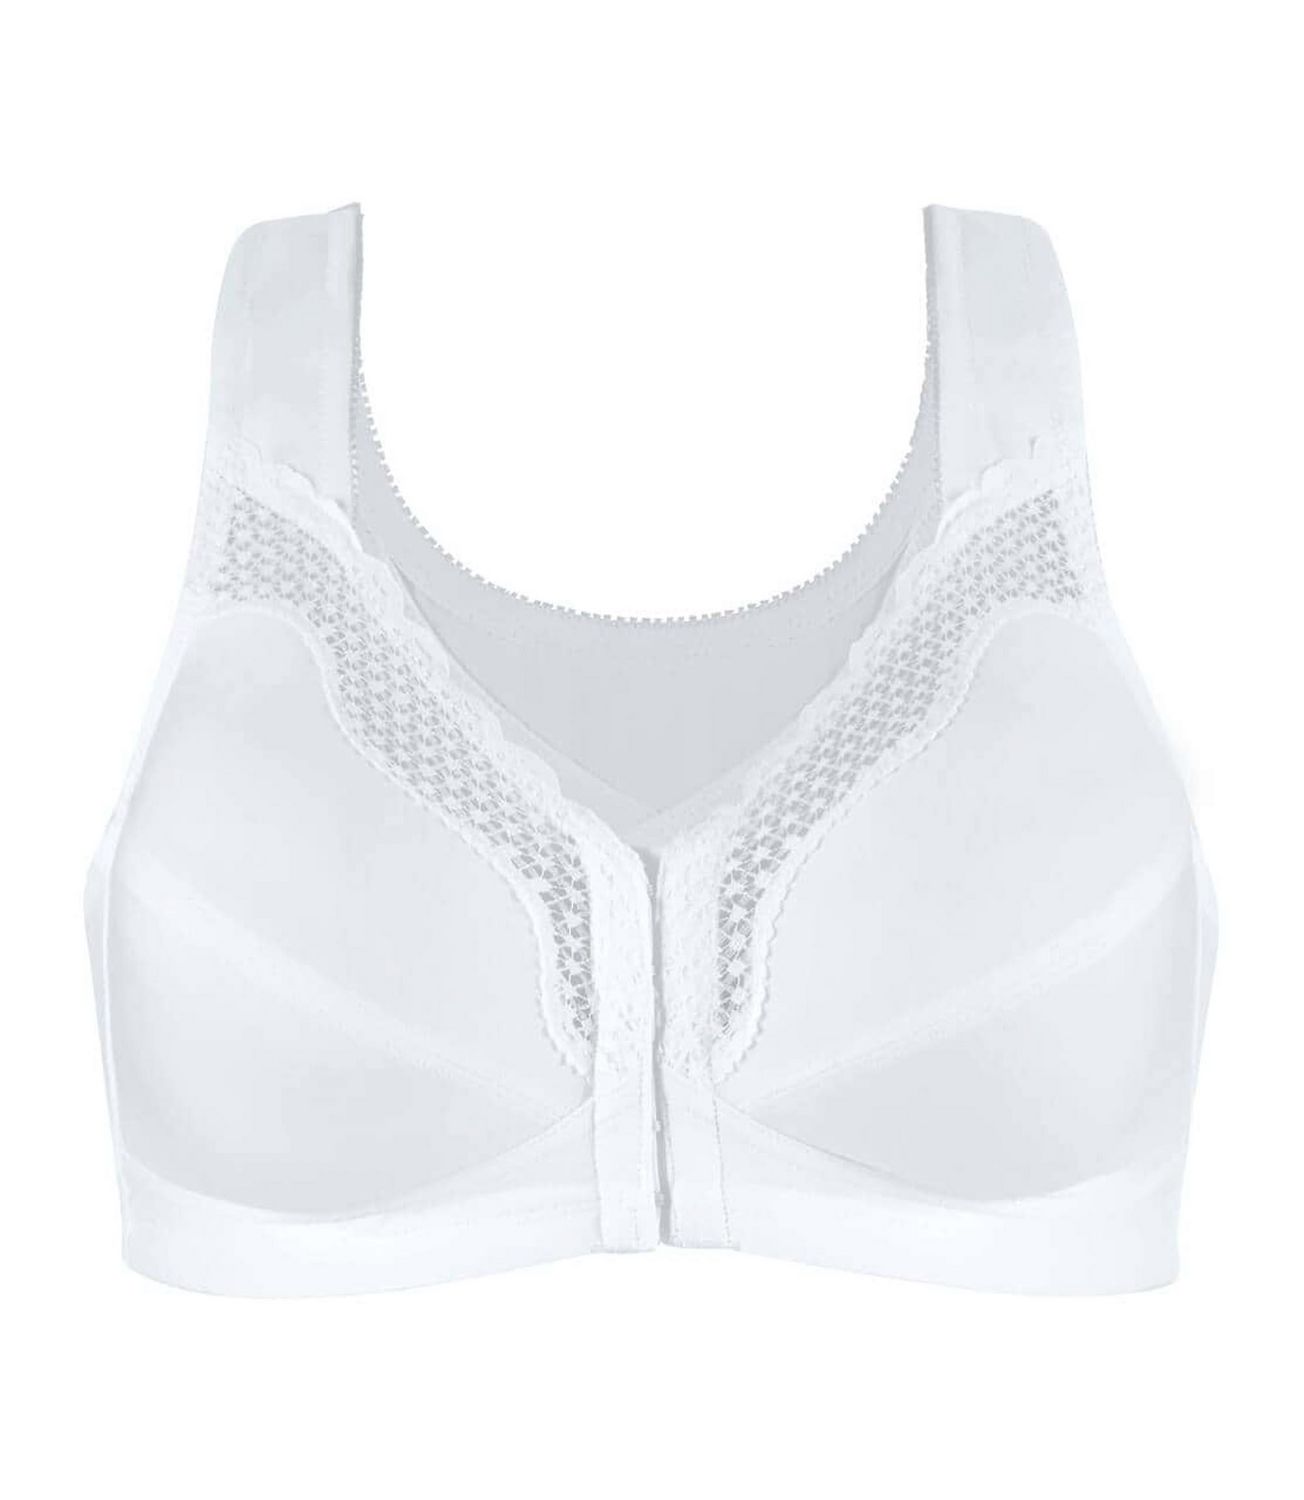 Bendon Sport Max Out High Impact Underwire Sports Bra White 73-408